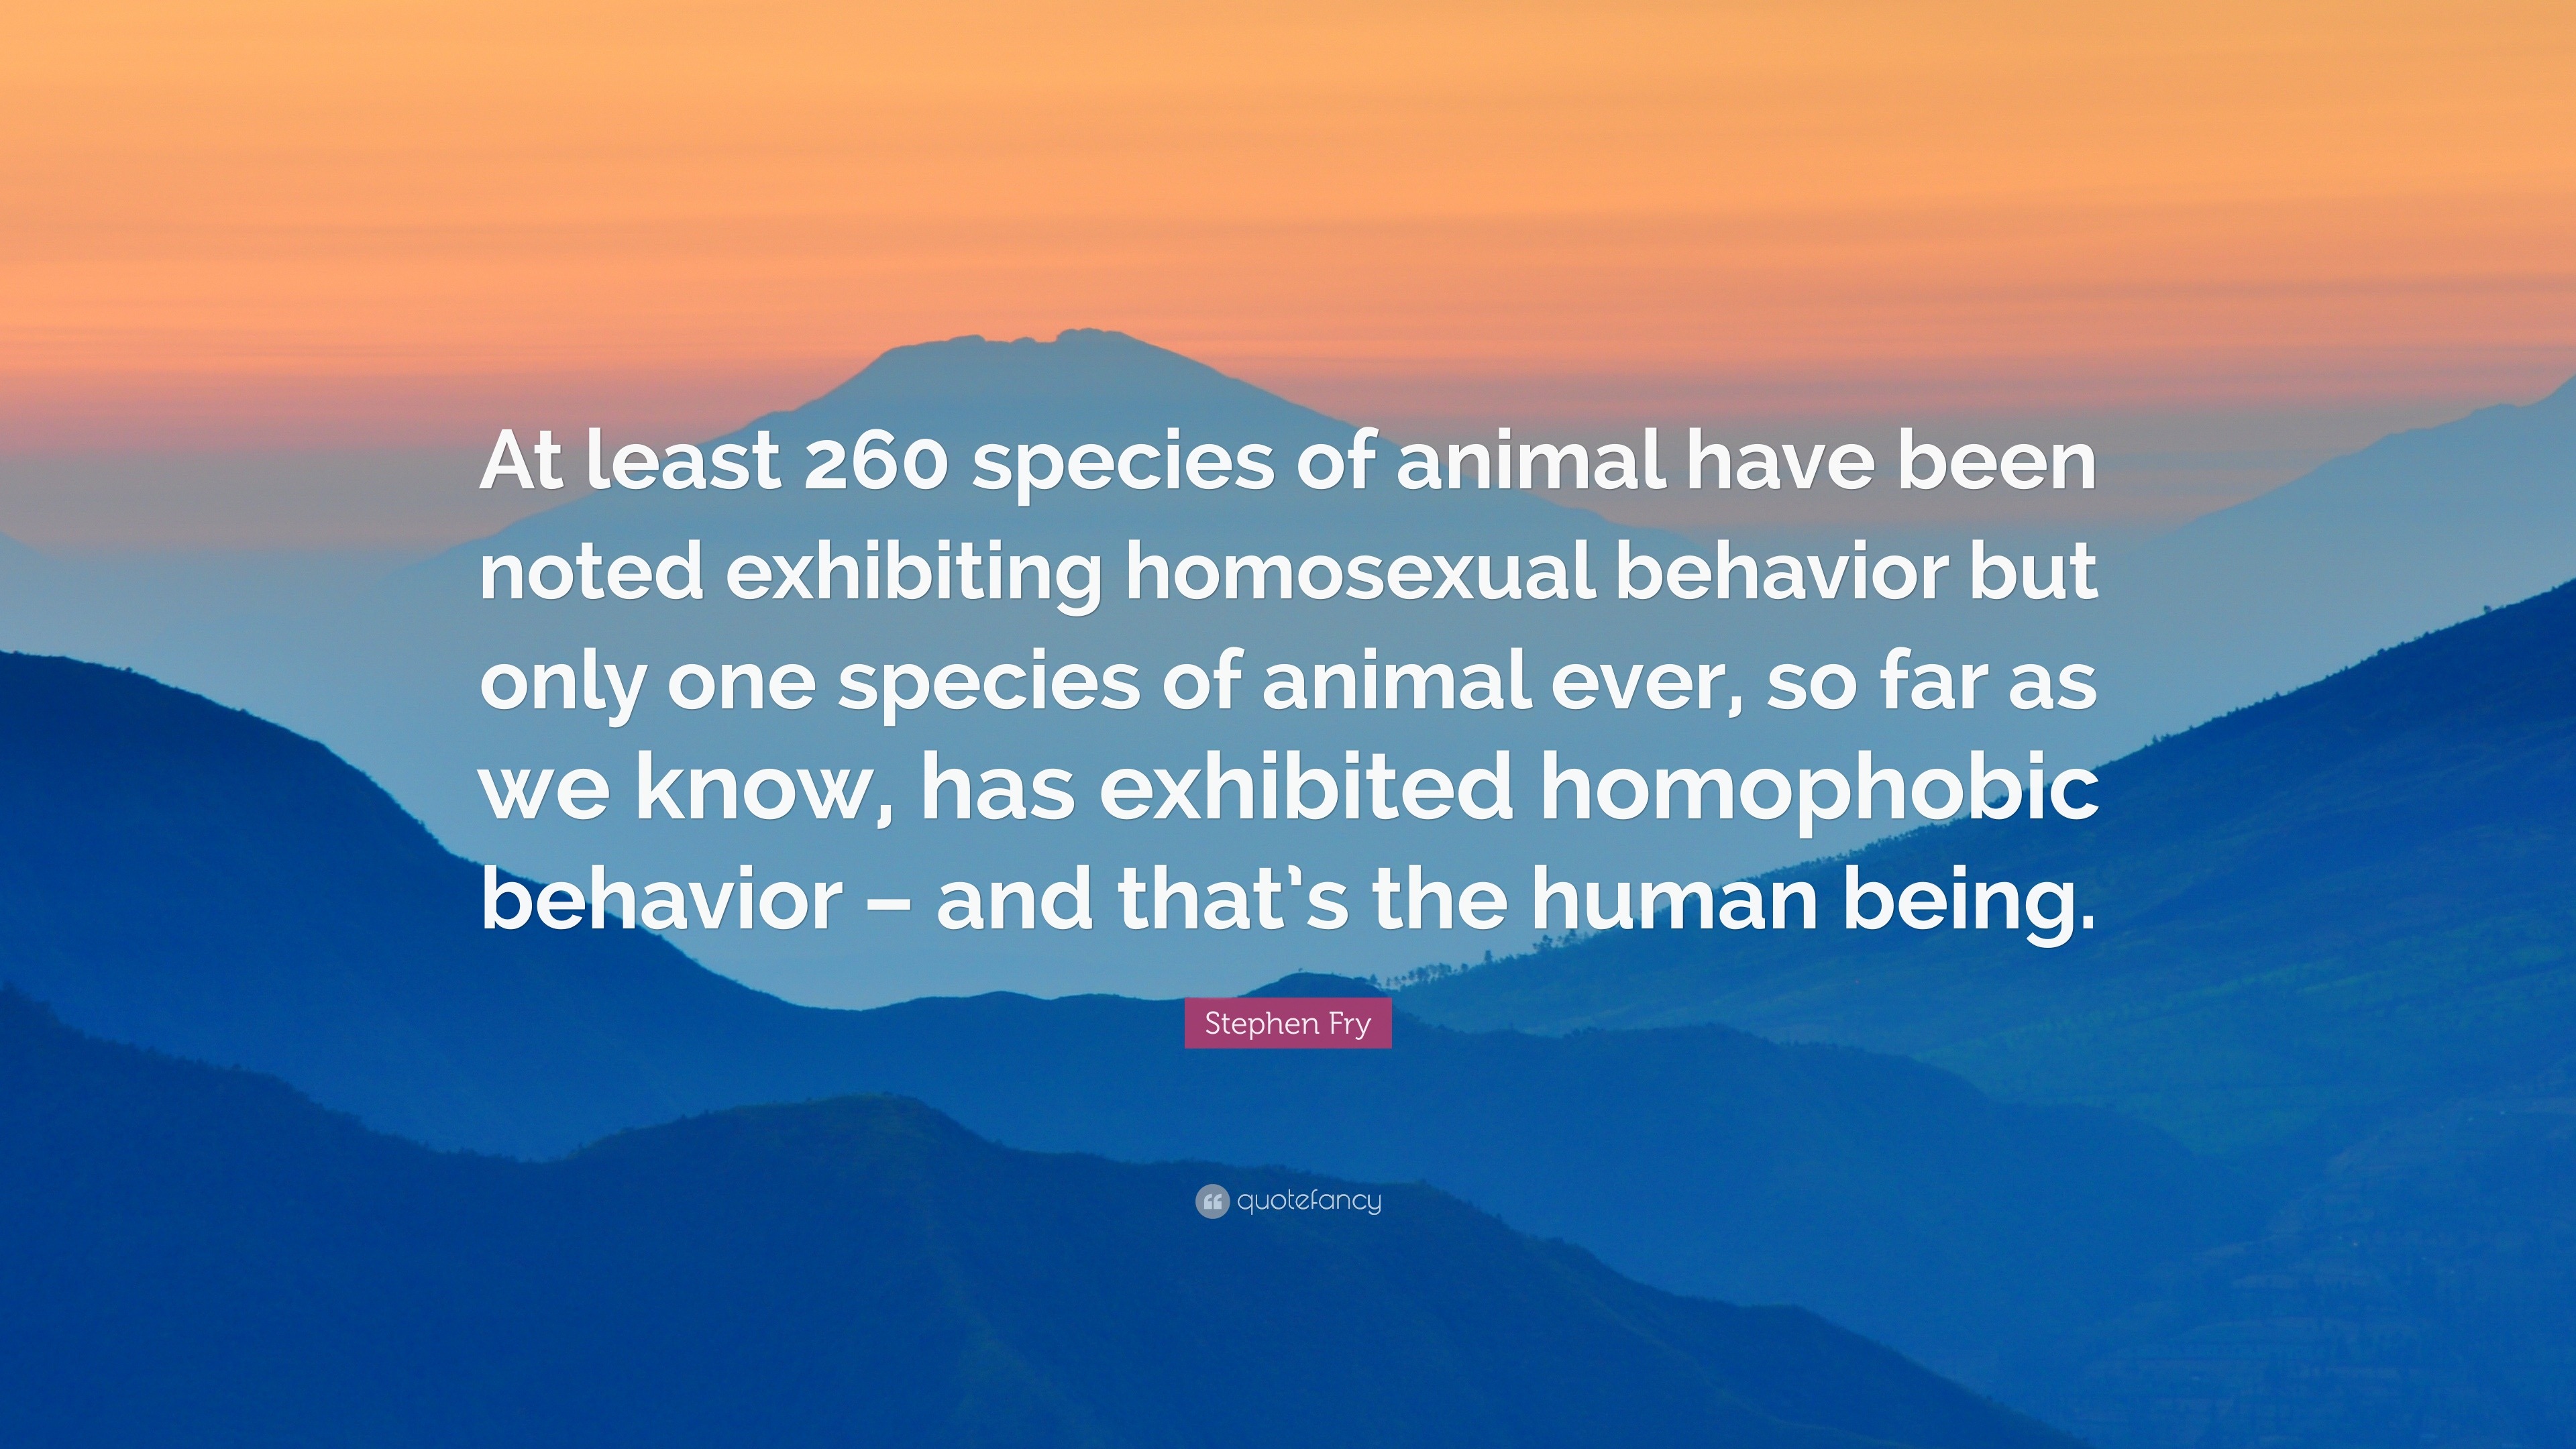 Stephen Fry Quote: “At least 260 species of animal have been noted  exhibiting homosexual behavior but only one species of animal ever, so  fa...”